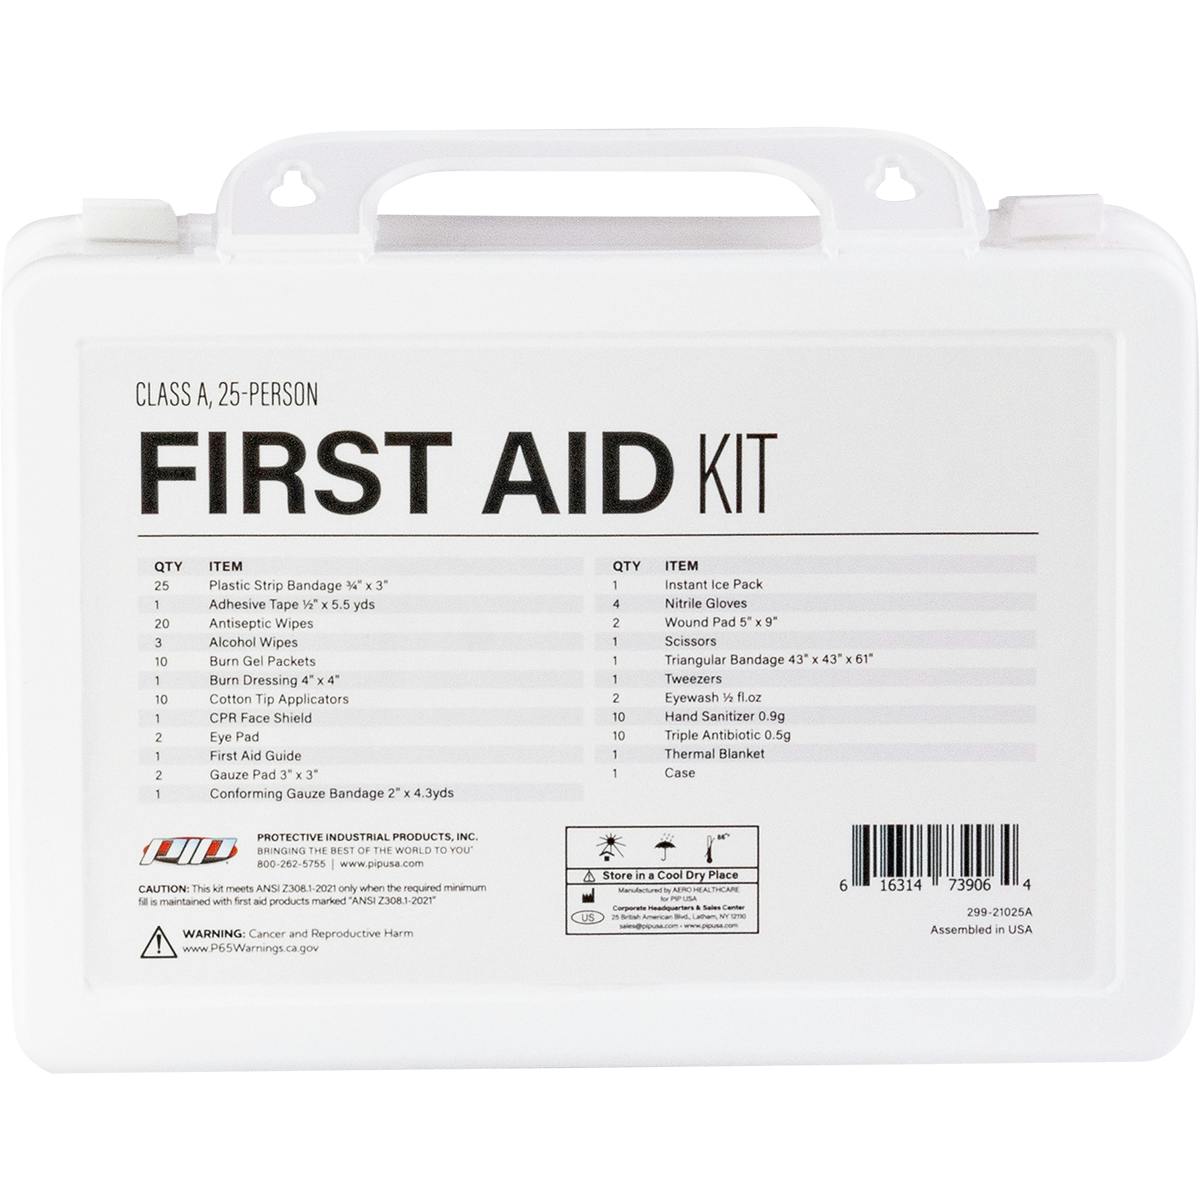 ANSI Class A Waterproof First Aid Kit - 25 Person, White (299-21025A) - KIT